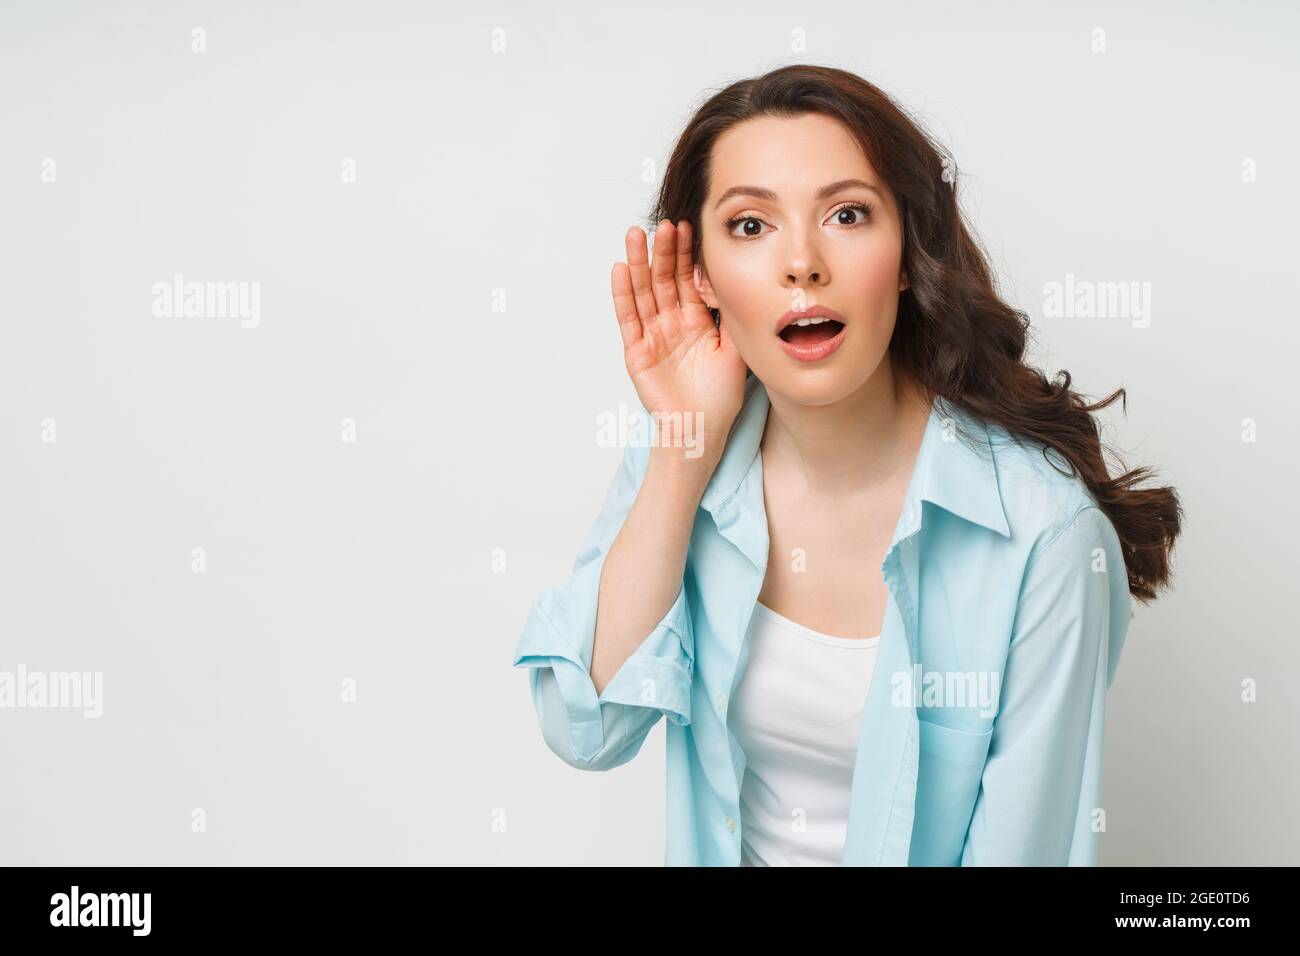 A young woman eavesdrops on someone else's conversation with her hand to her ear. The concept of eavesdropping, espionage, gossip and the yellow press Stock Photo